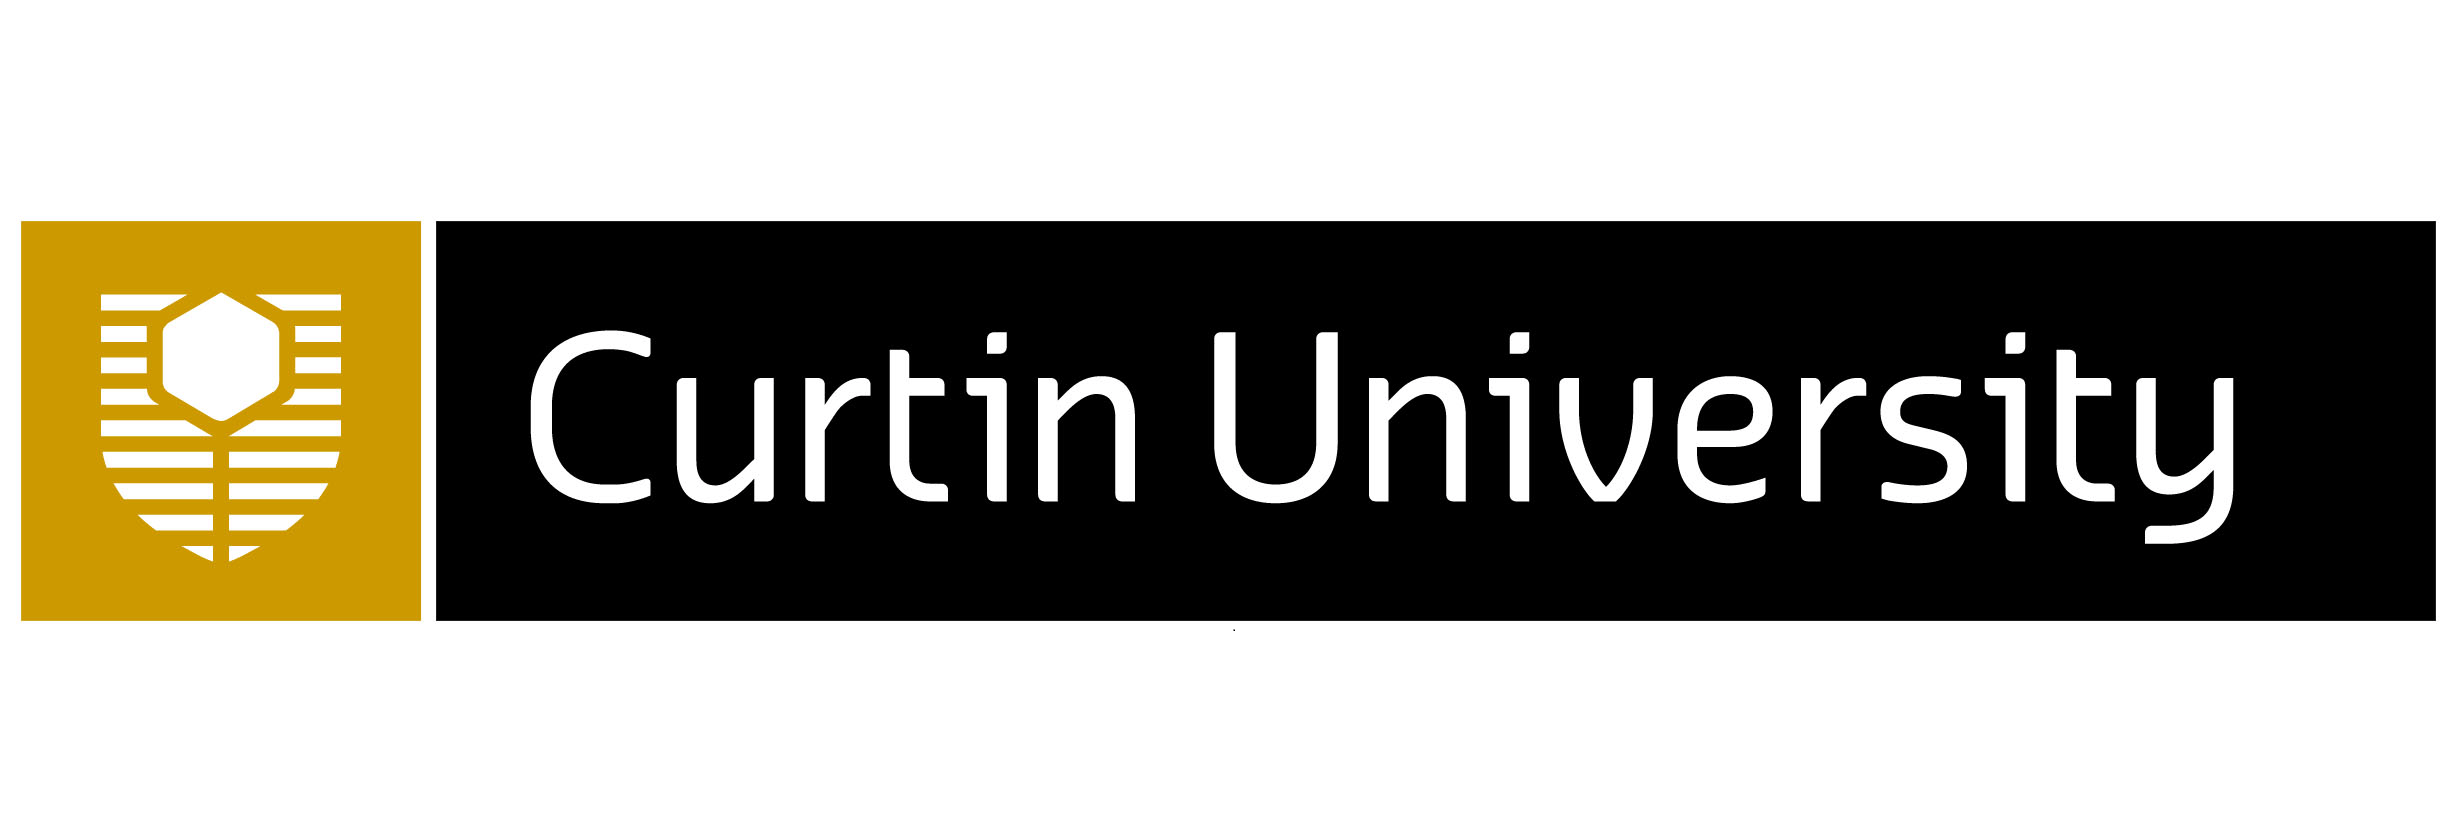 Graduate Certificate in Finance and Investment Analytics | Graduate diploma / certificate | Business | On Campus | 1 year | Curtin University | Australia